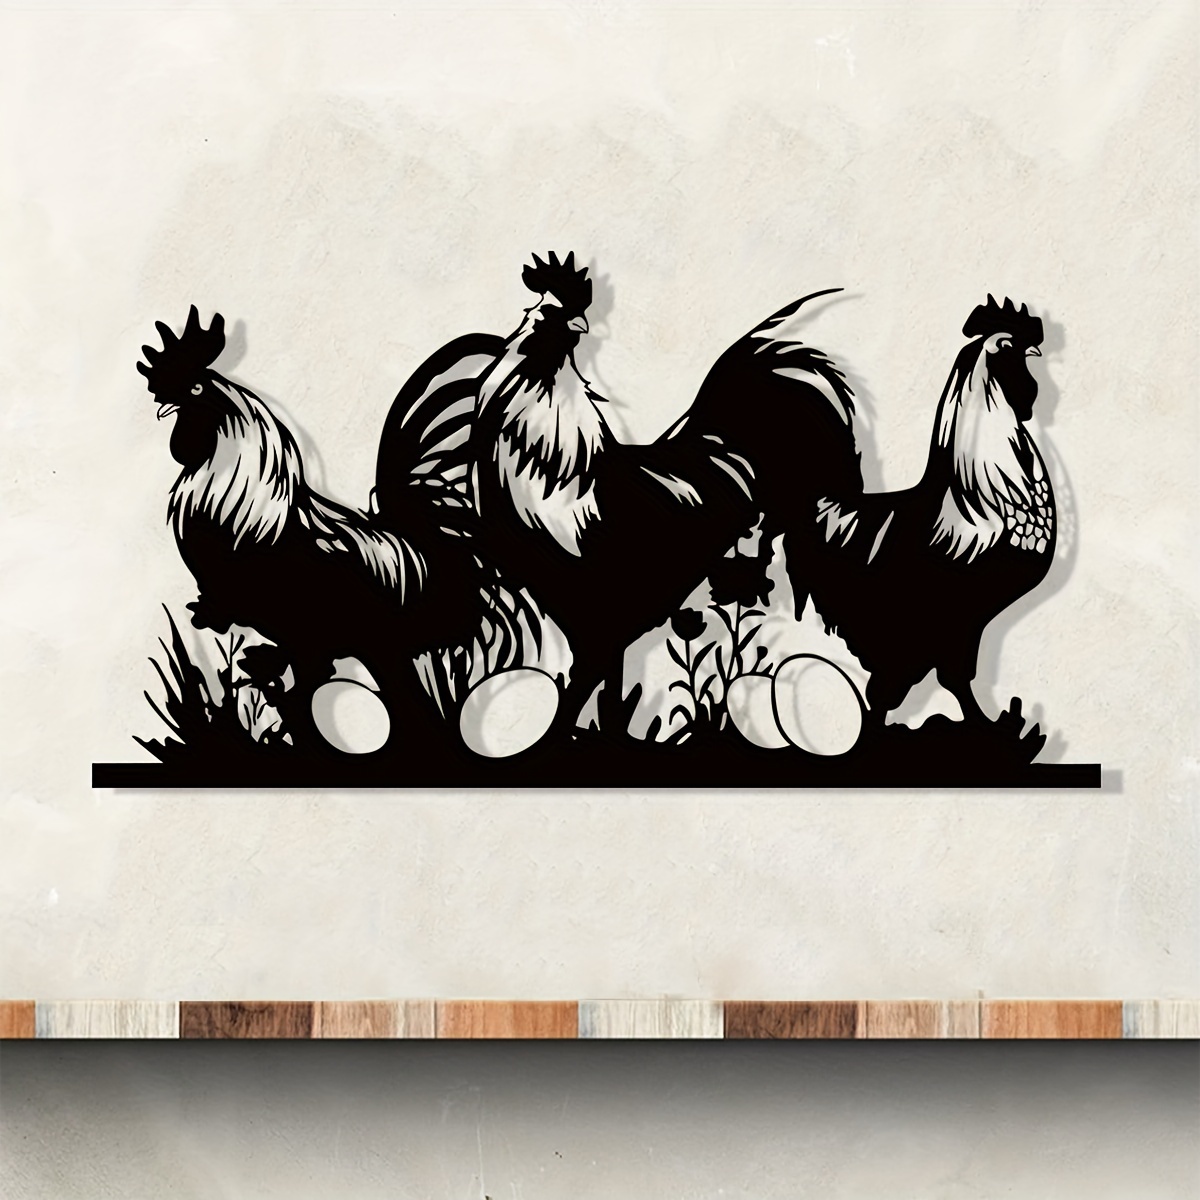 60 Black and White Rooster Decorative Yard Art